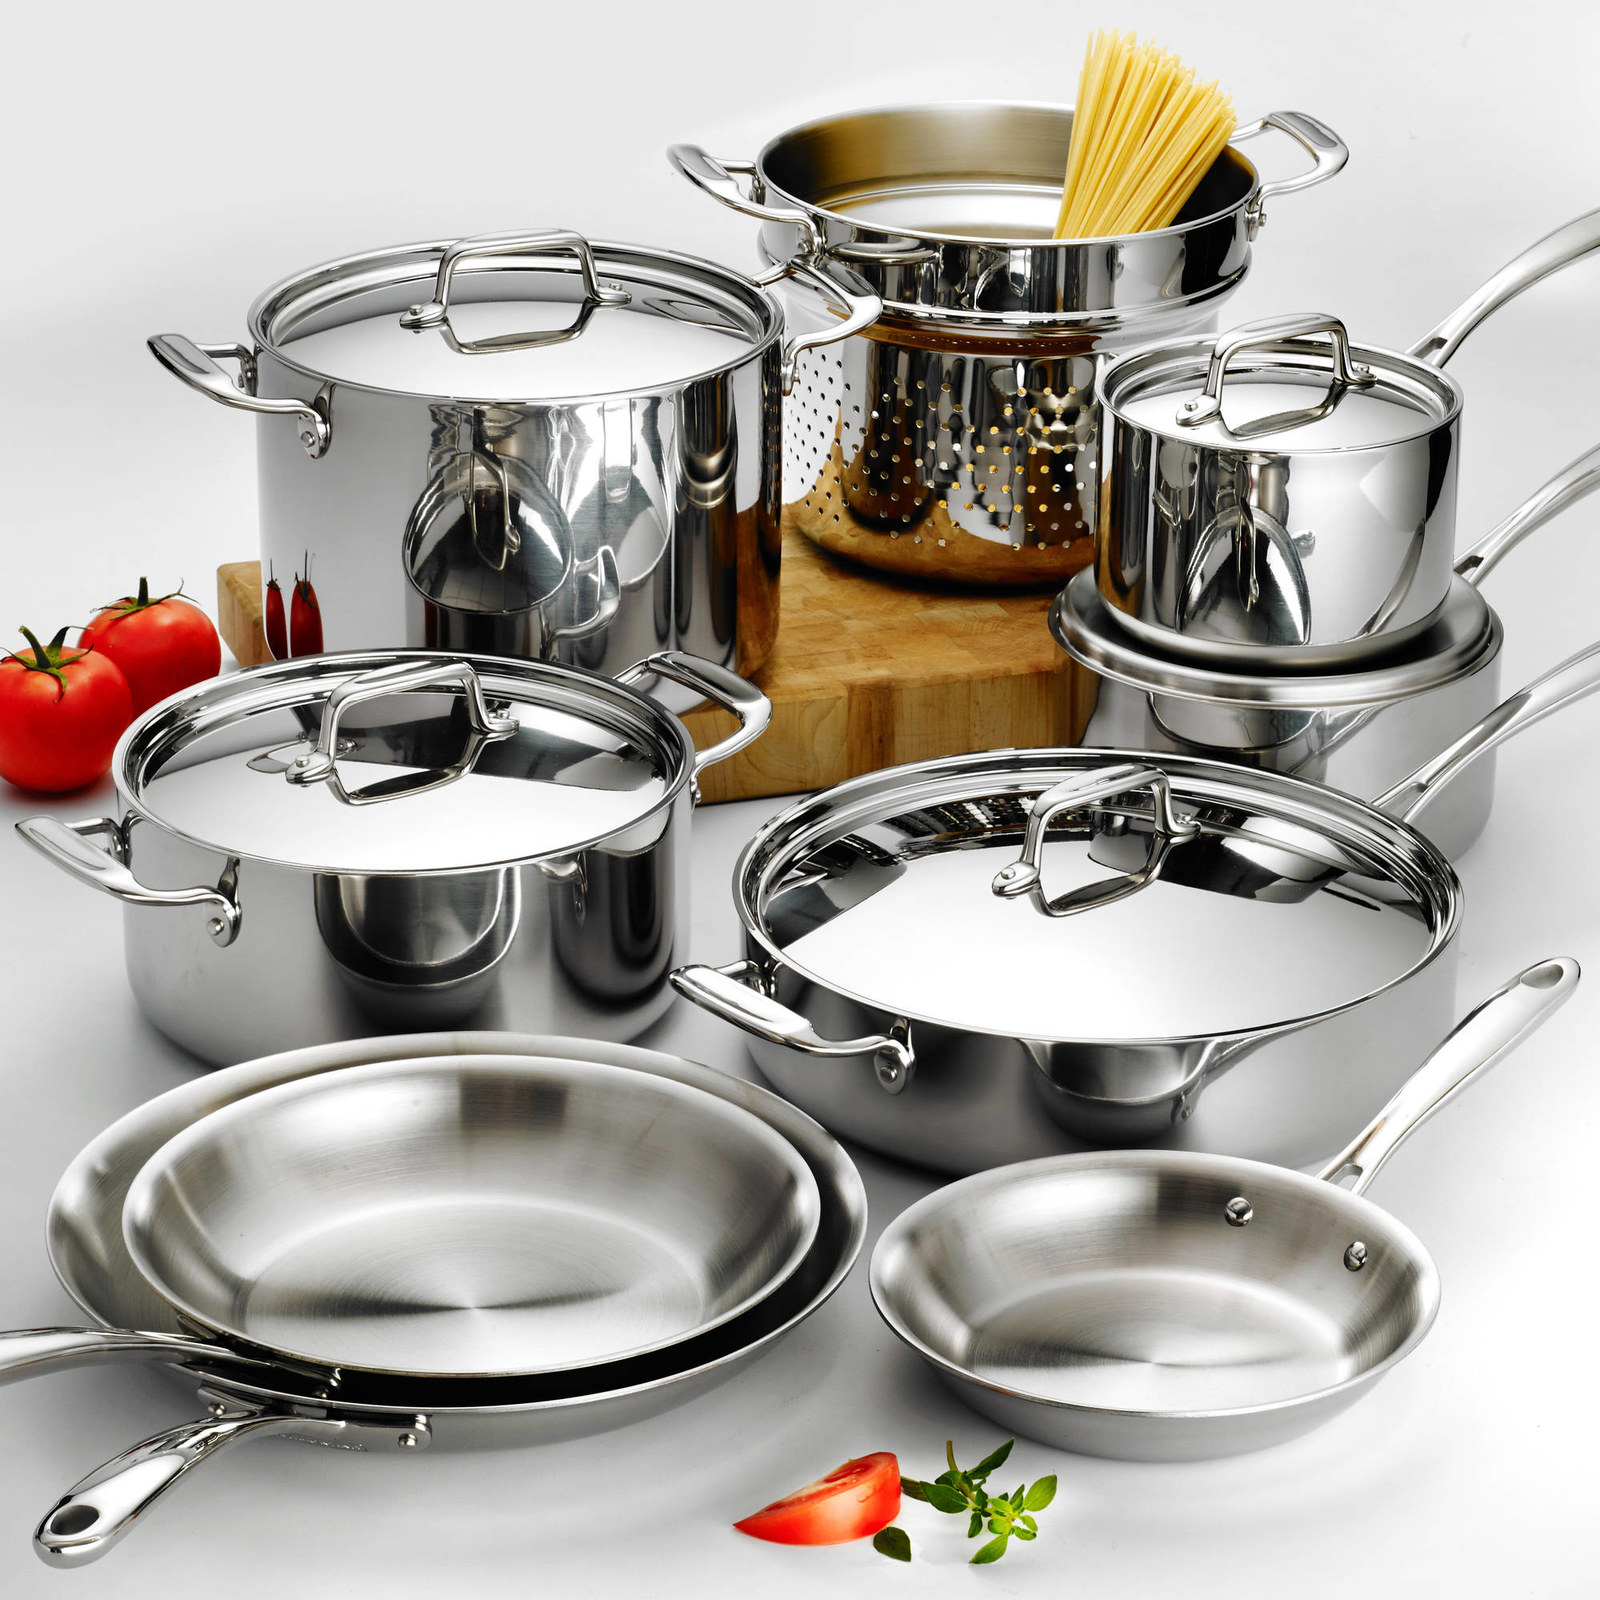 Cooking With Stainless Steel Cookware